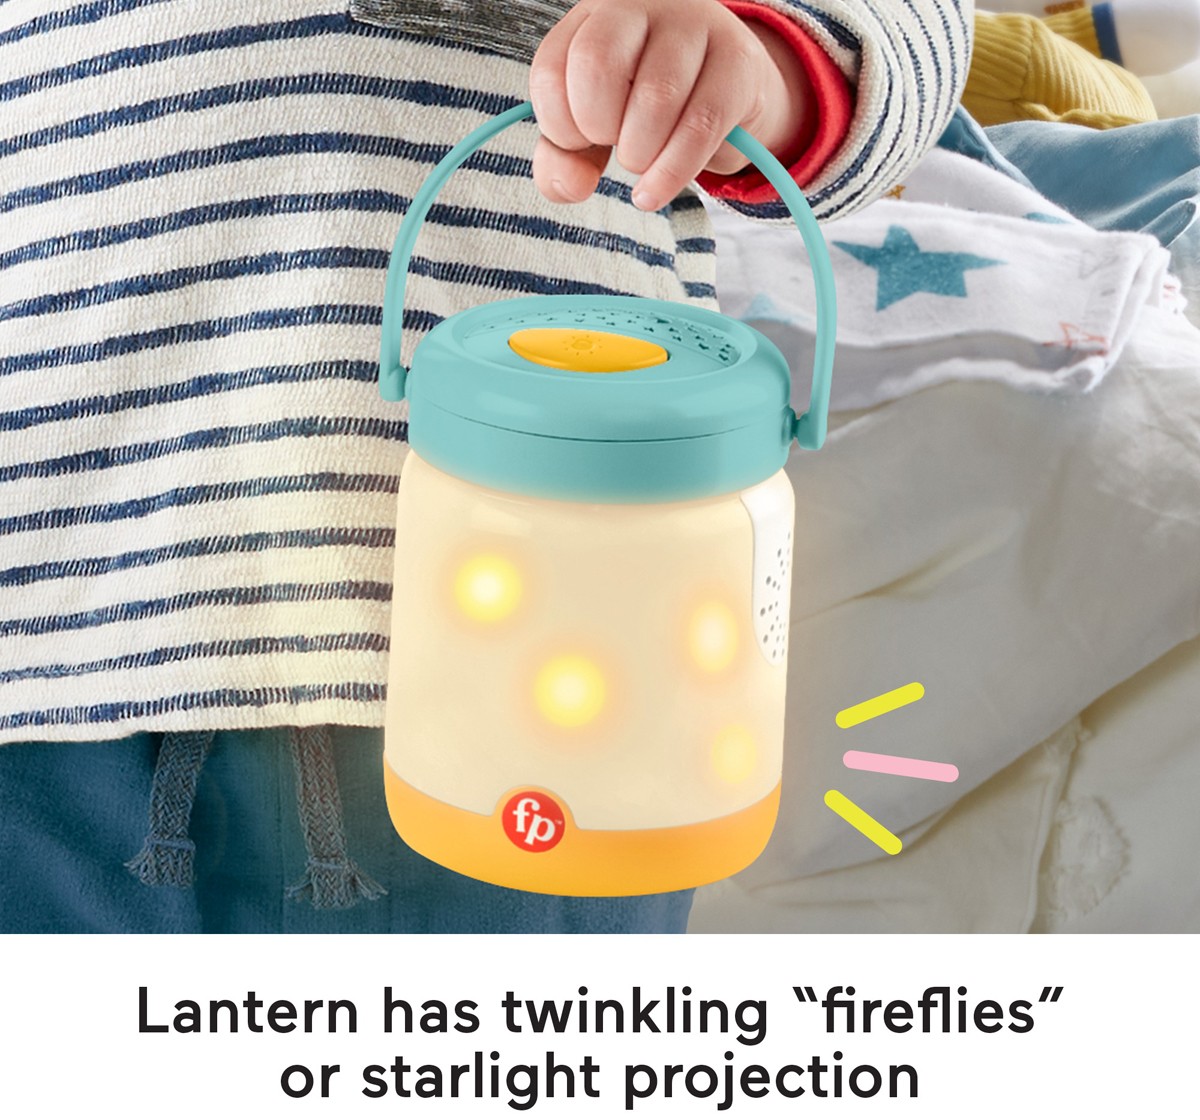 Fisher-Price Baby Bear & Firefly Soother, Light-Up Nursery Sound Machine With Take-Along Plush Toy For Babies And Toddlers, 0Y+, Multicolour